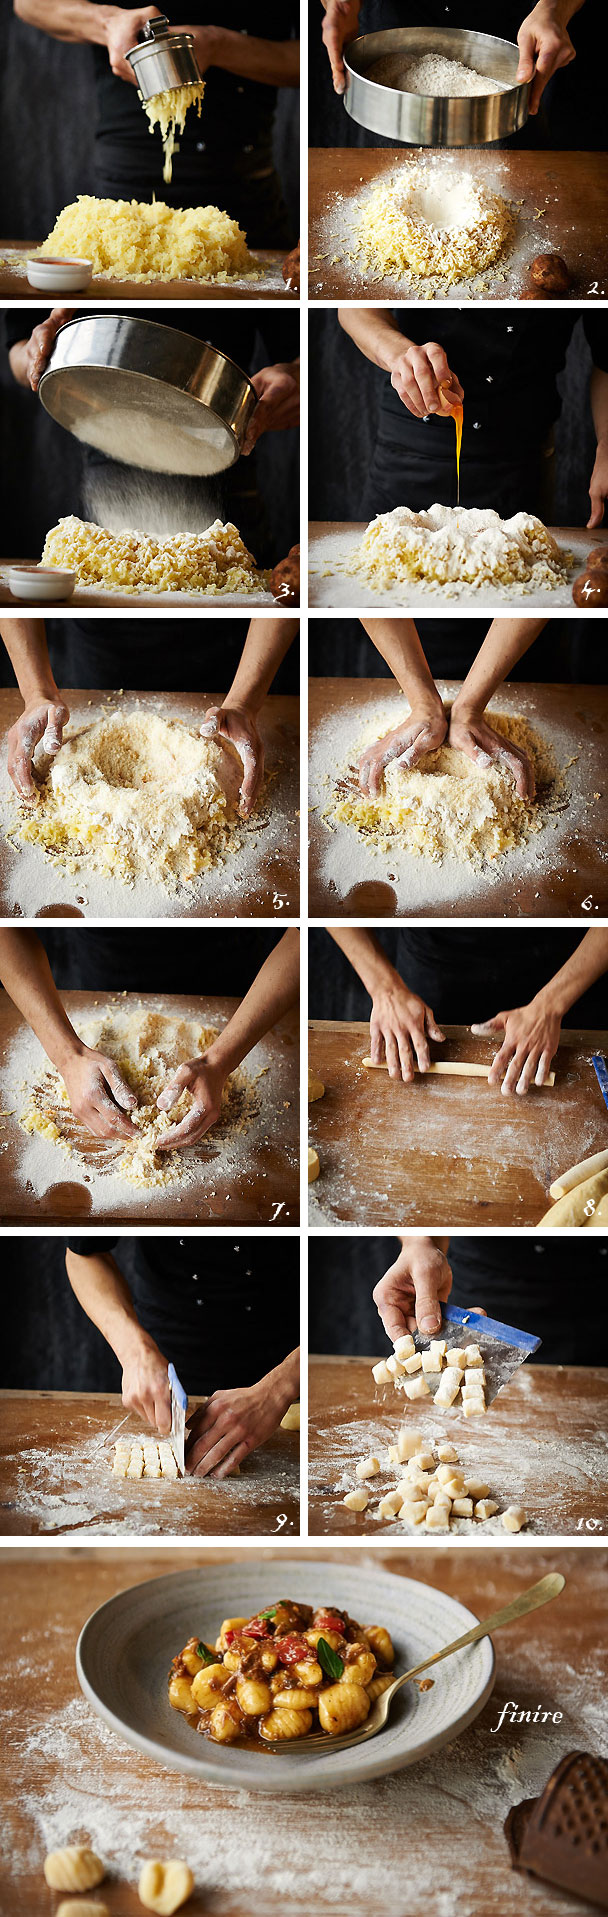 How to Make the Perfect Gnocchi with Milano Torino